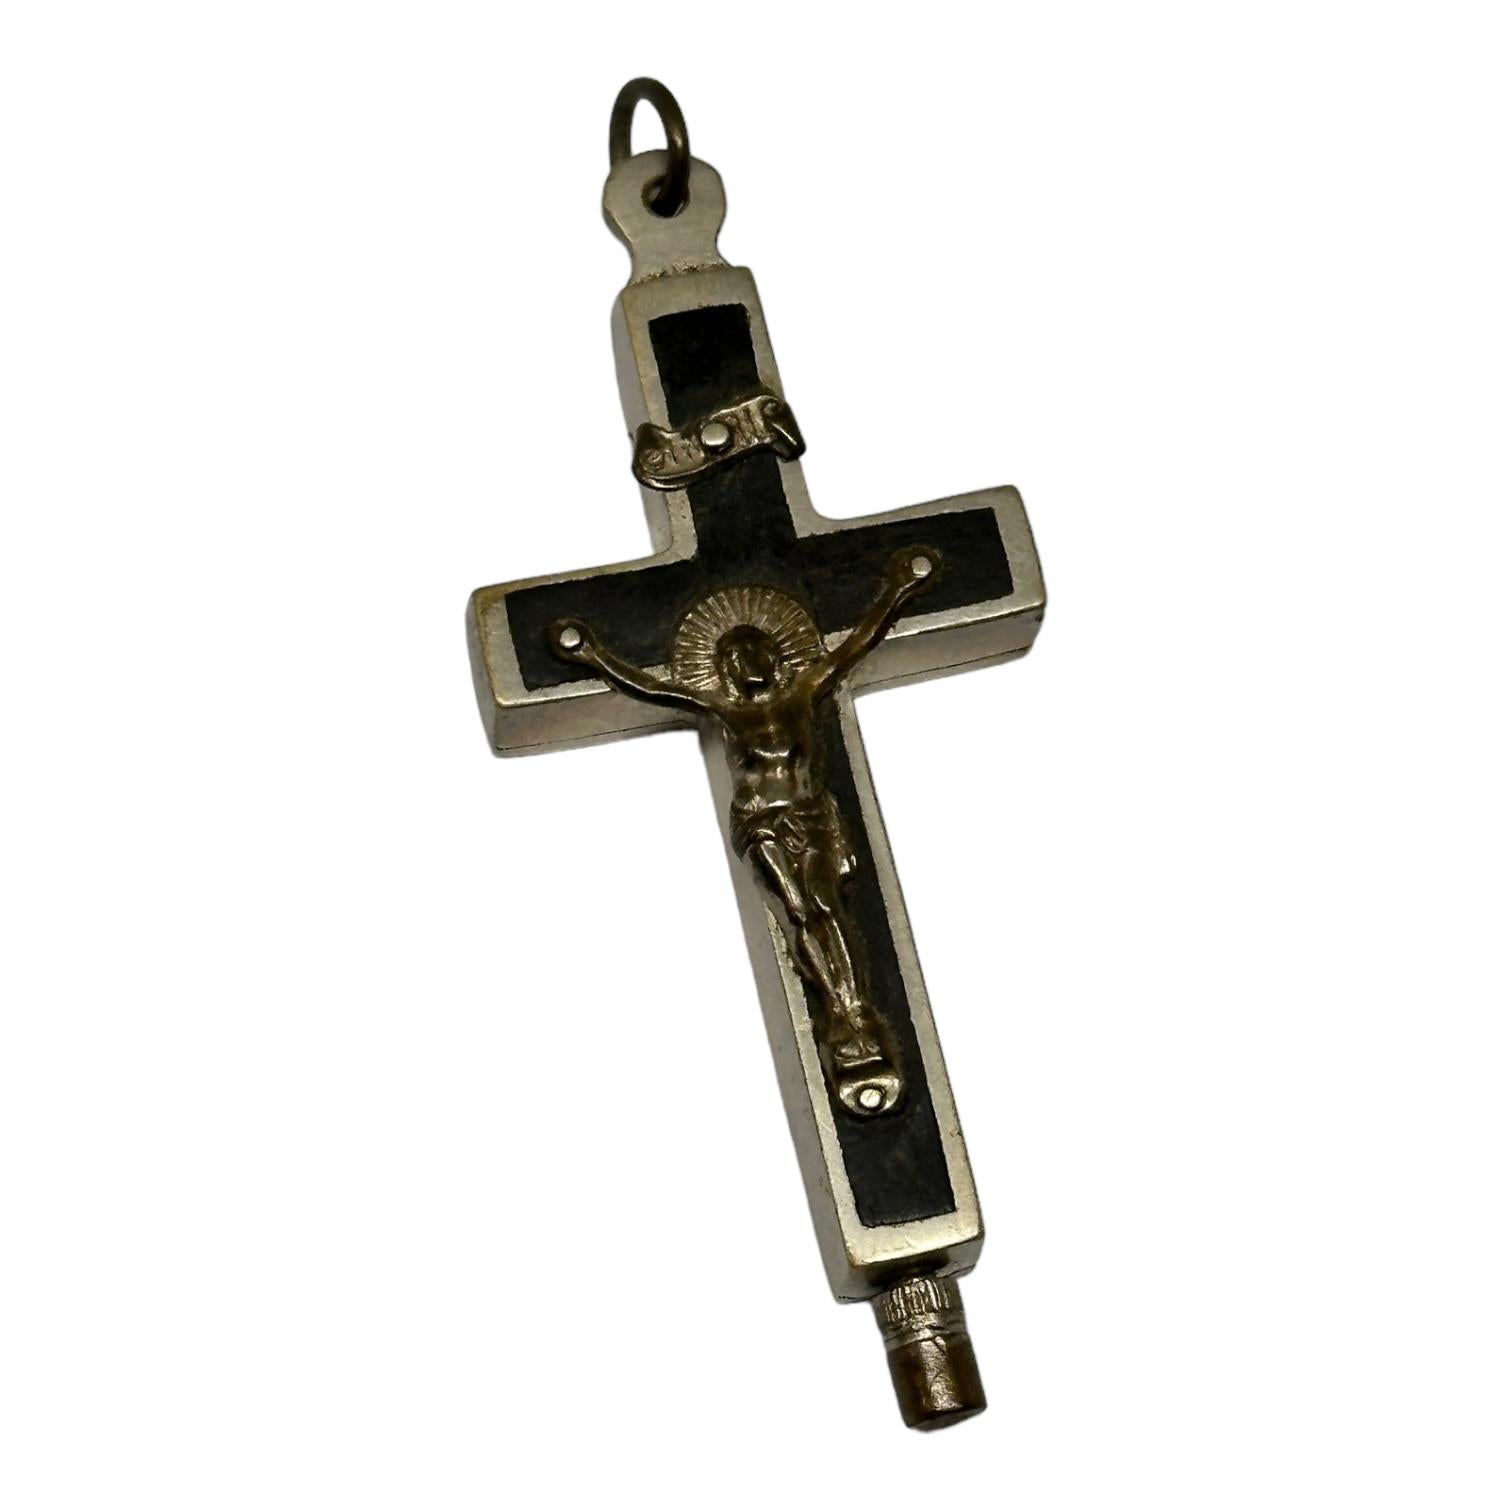 This antique reliquary contains relics of Saints. It is hand made of metal and wood. Perfect as a pendant for a rosary.
This is a 3rd class relic. For a better understanding, Relics are divided into three classifications. A first class relic is a